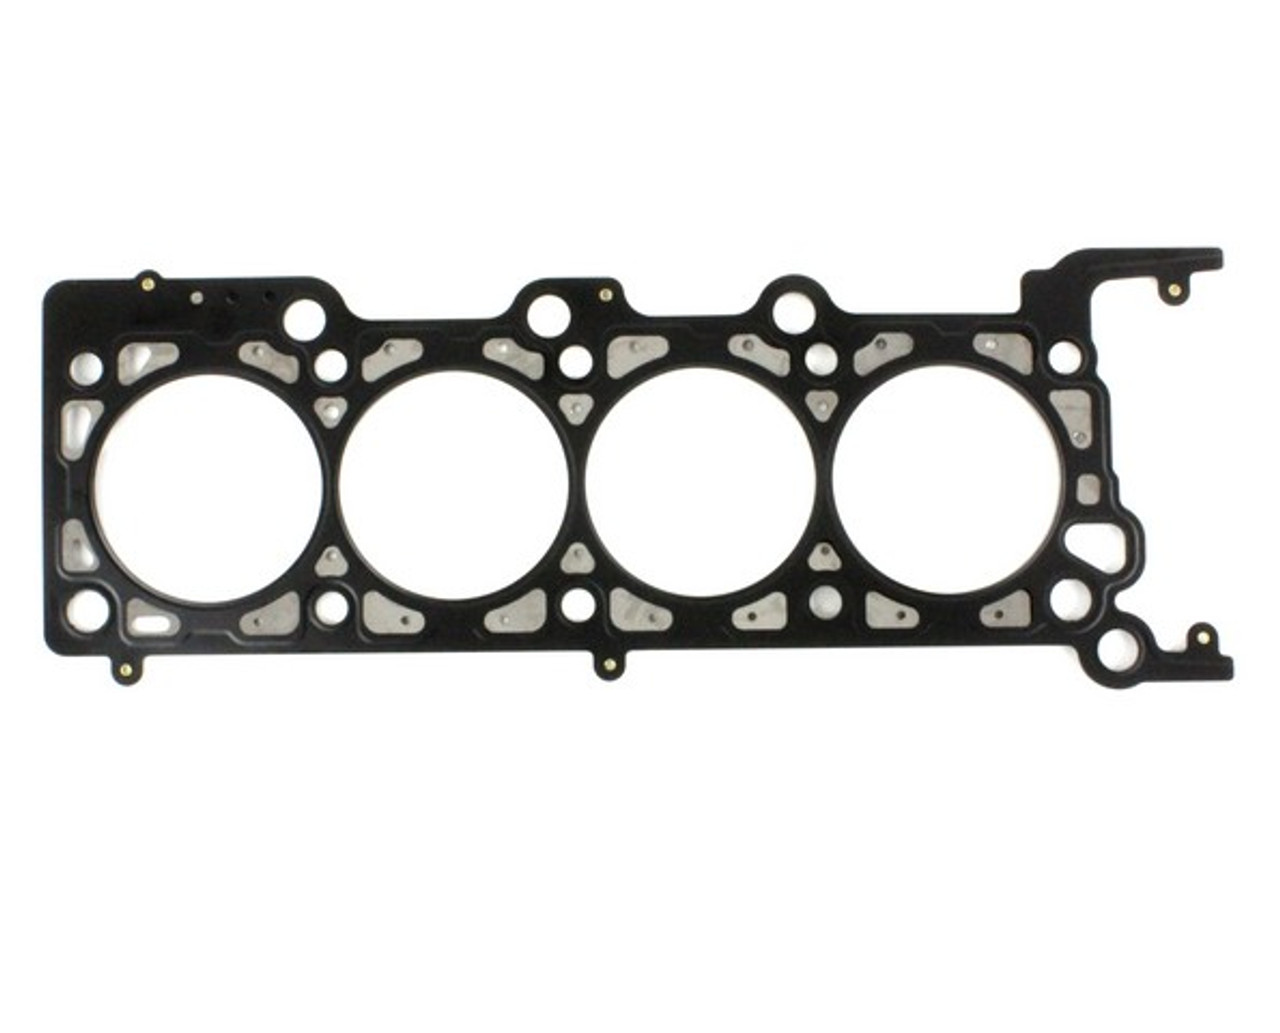 Head Gasket 4.6L 2003 Ford Mustang - HG4135L.1